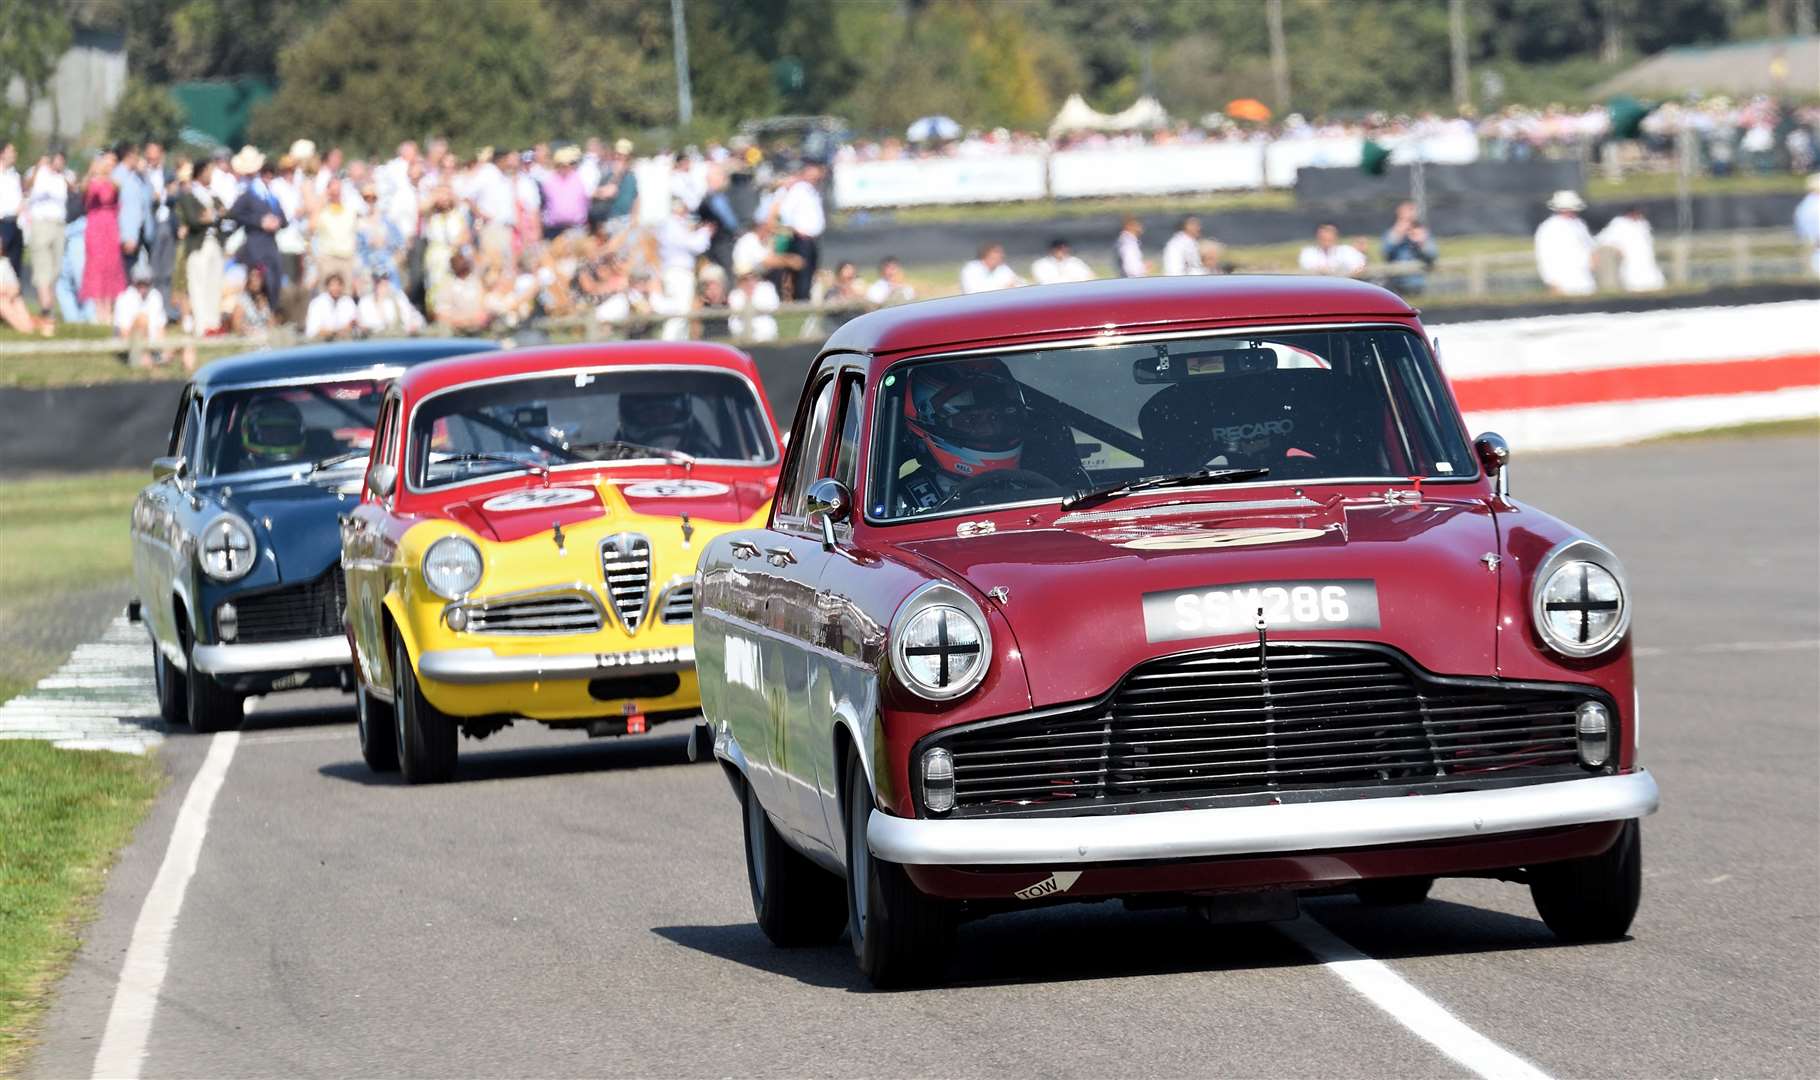 Gary Paffett races Theo Paphitis’ 1958 Ford Zodiac Mk2 in the St Mary's Trophy. Picture: Simon Hildrew